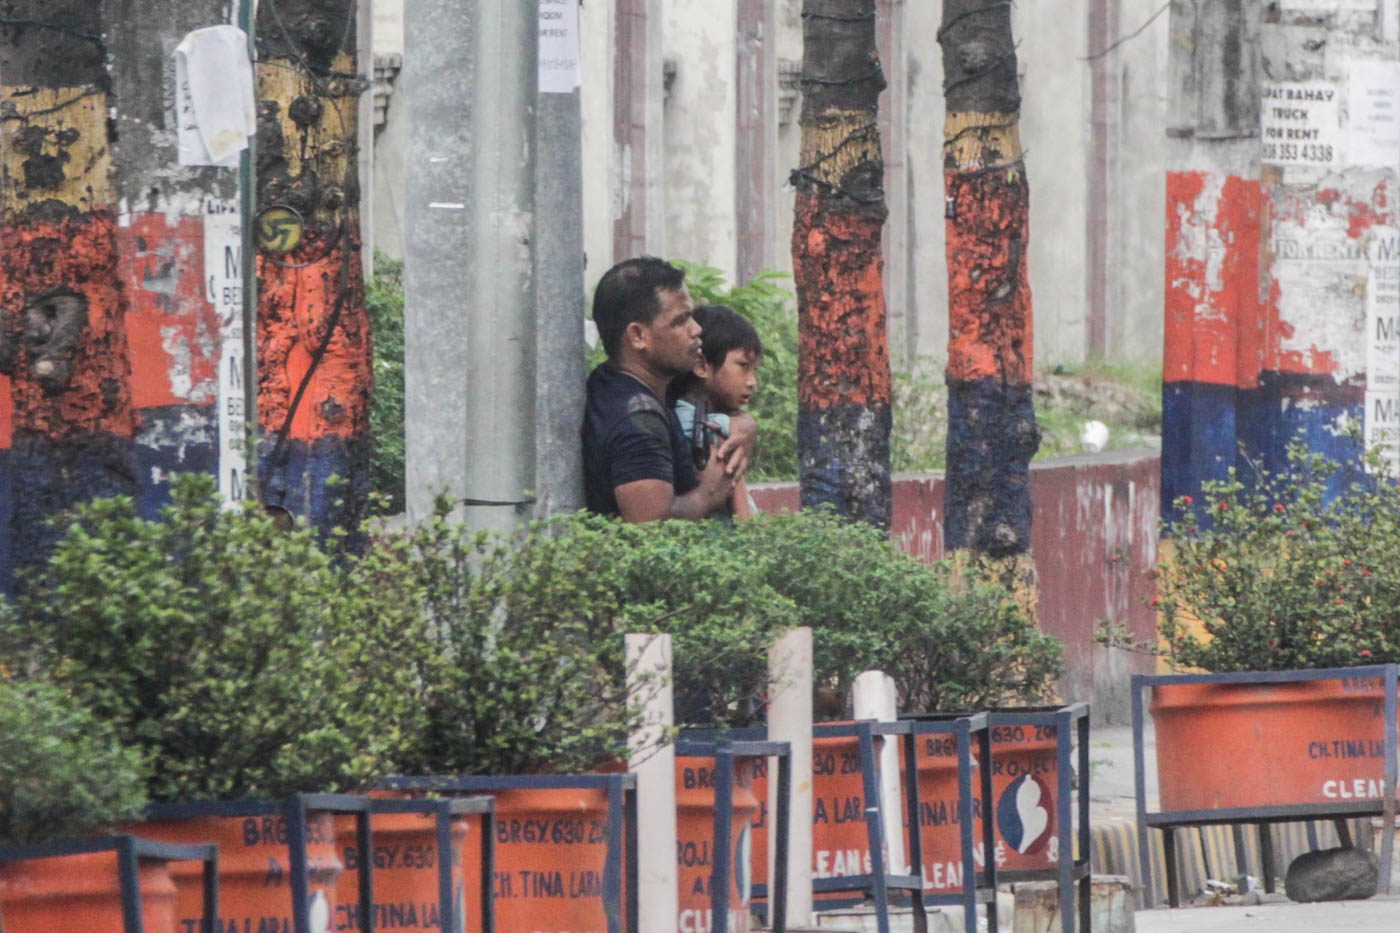 LOOK: Man holds 5-year-old hostage outside PUP campus